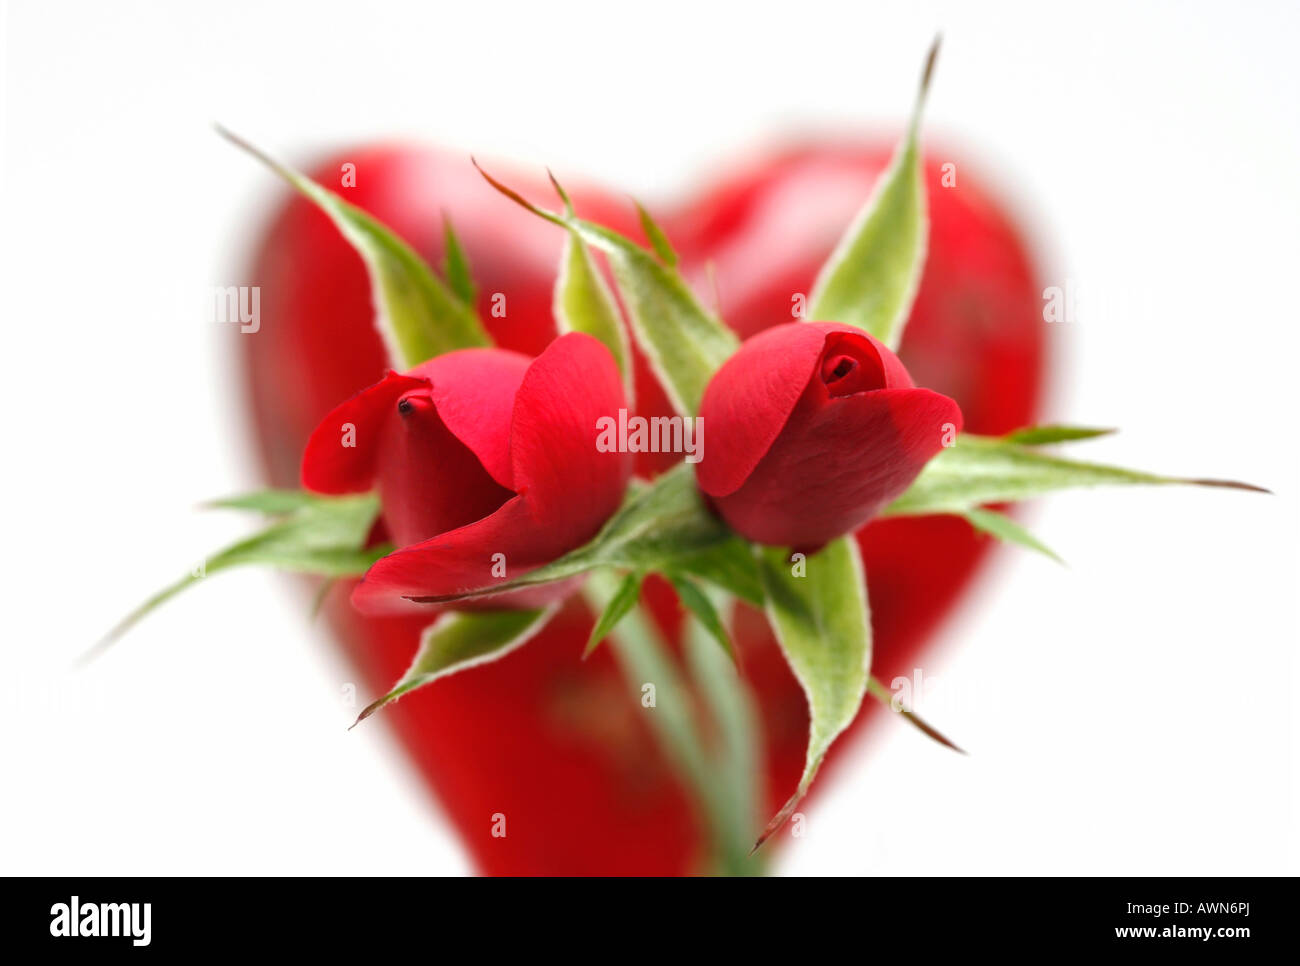 Red rose (Rosa) in front of a red glass heart Stock Photo